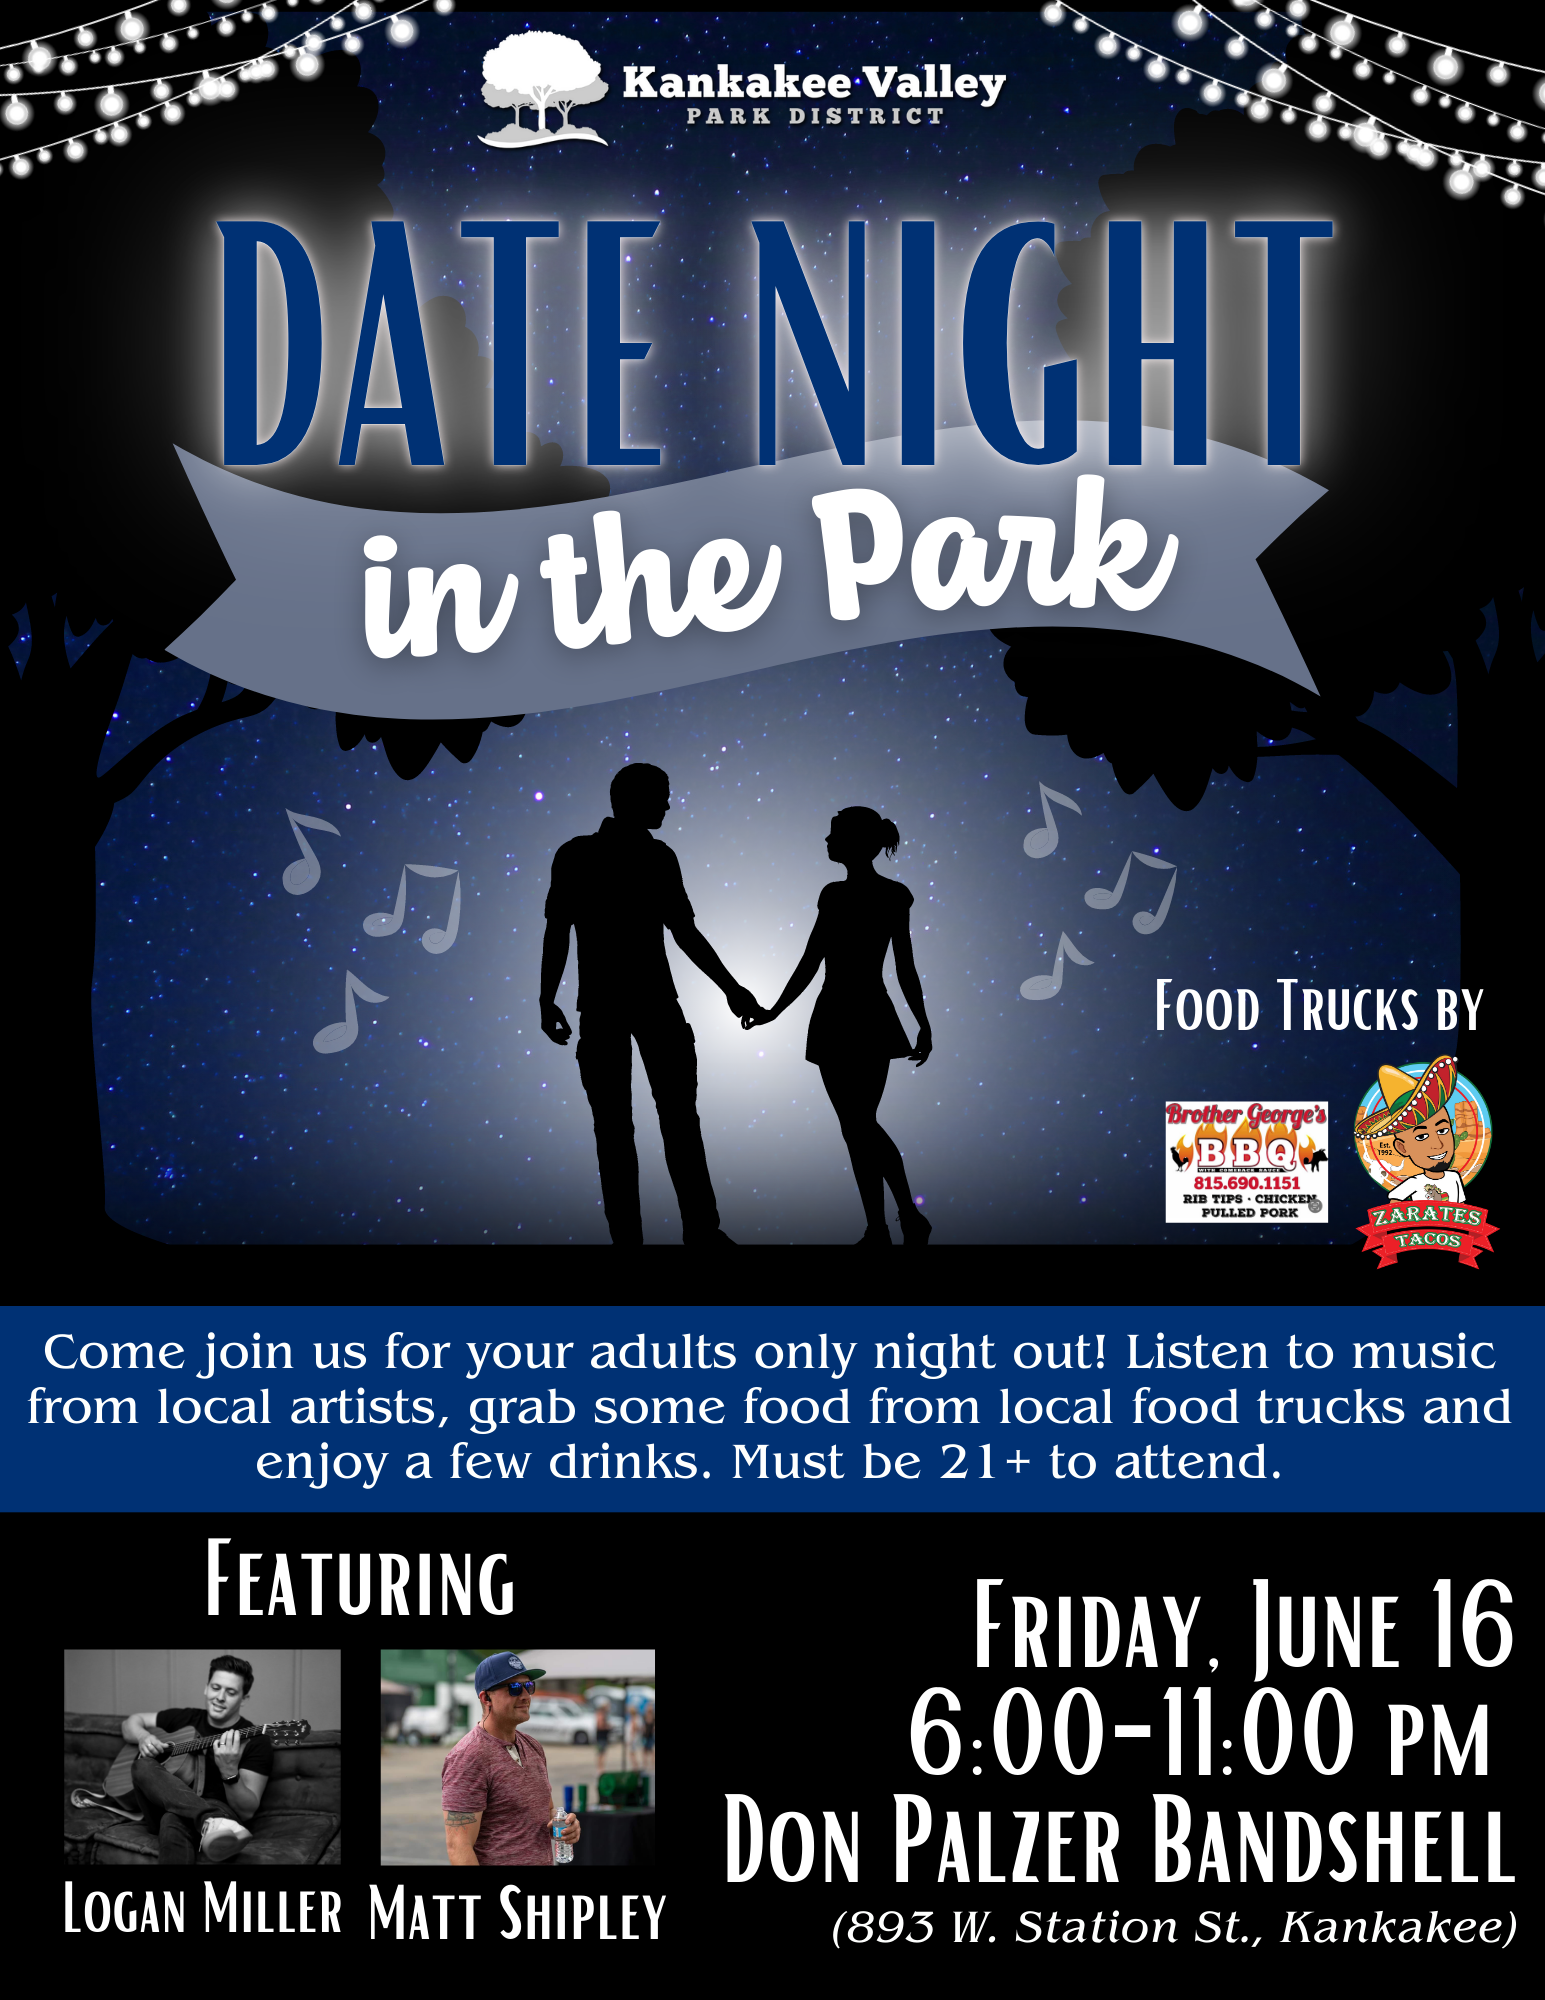 Date Night in the Park